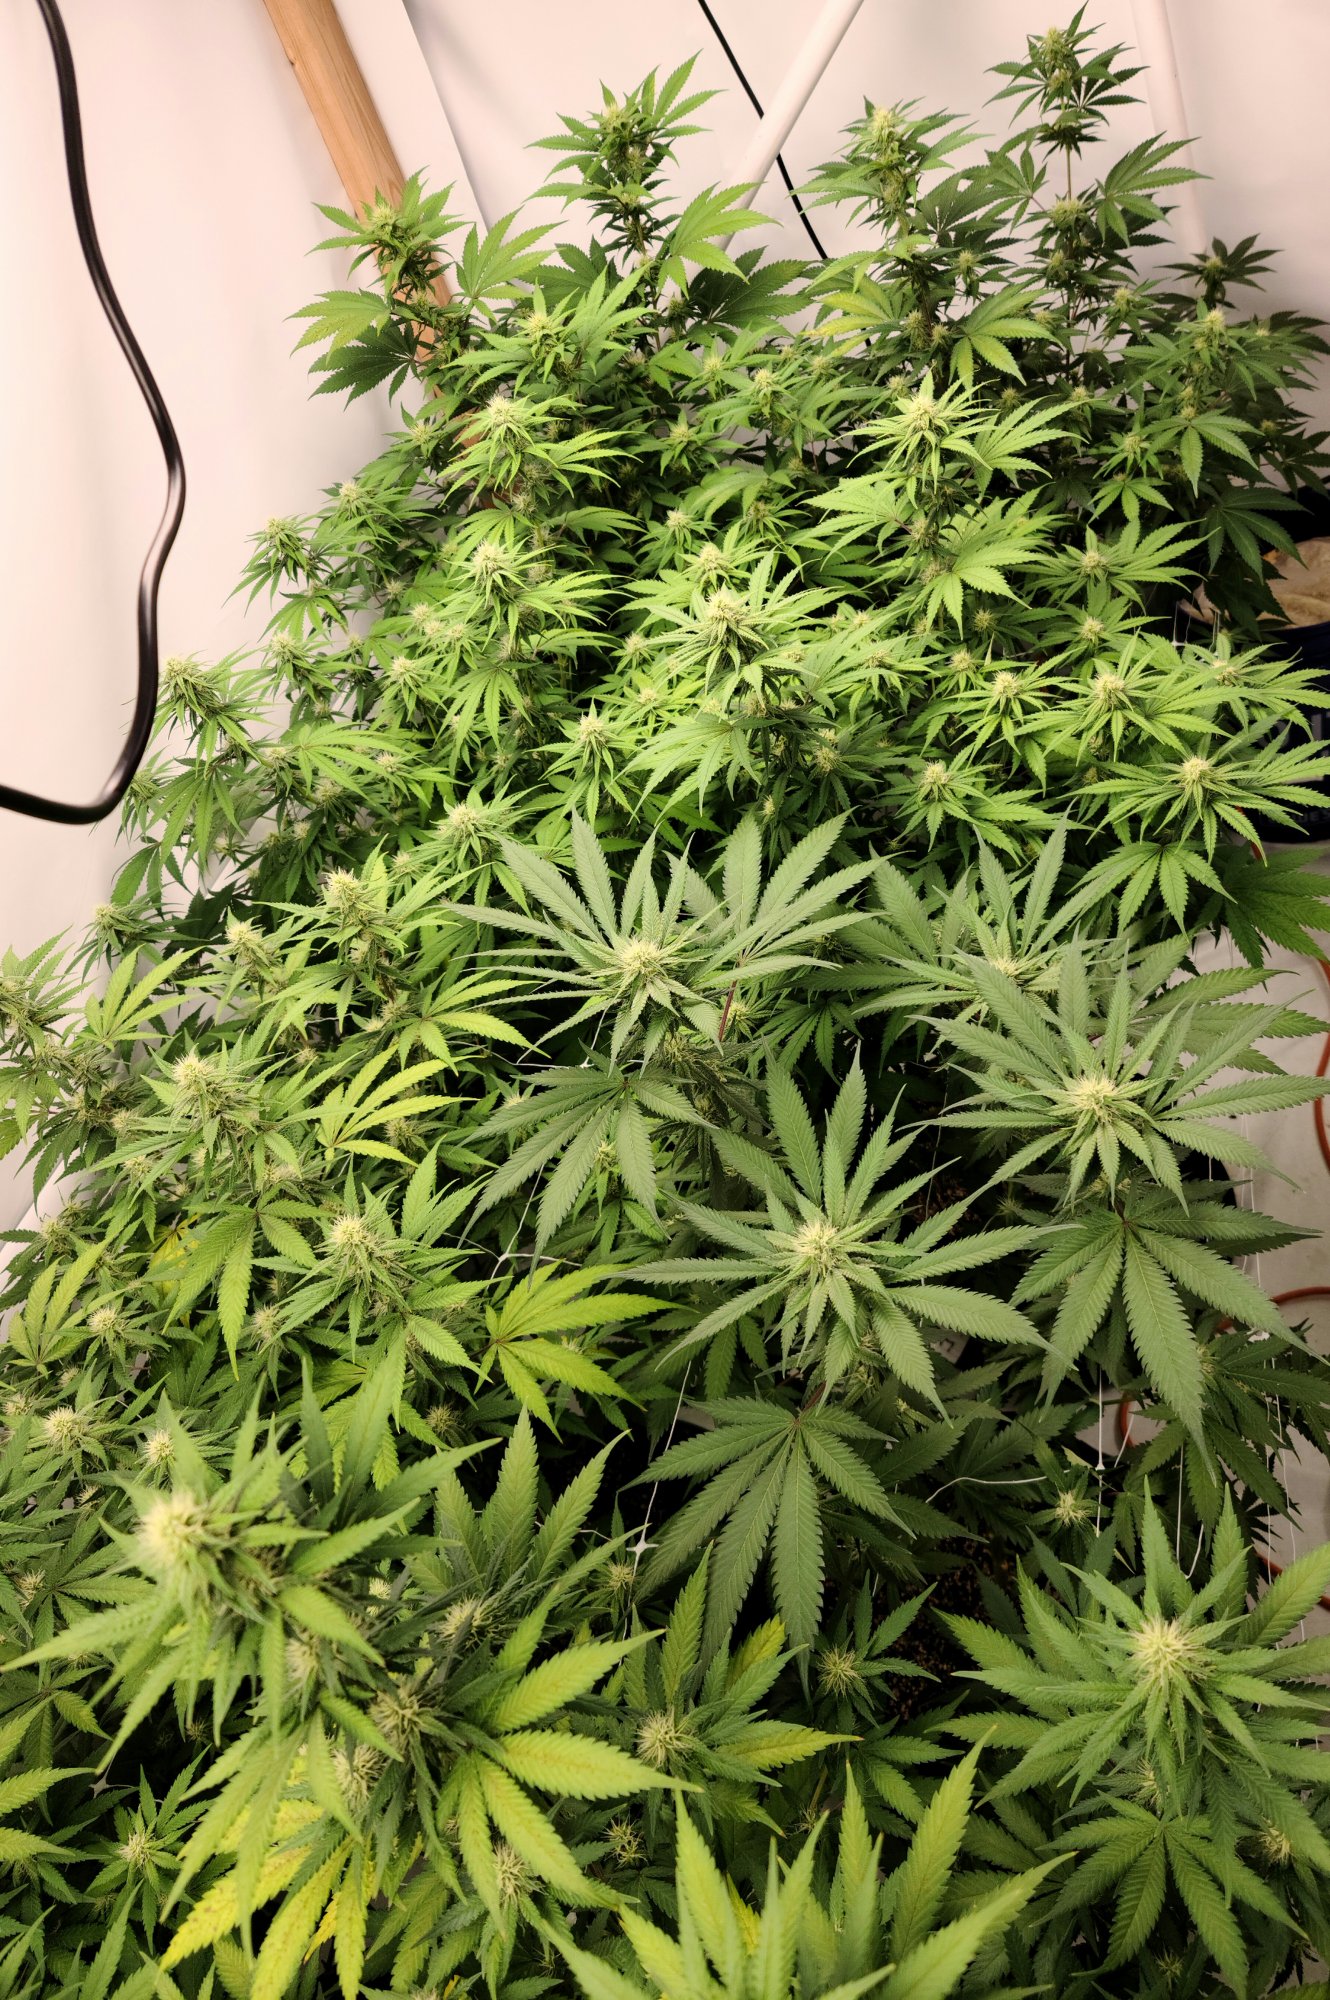 Need opinions on plant issues 3